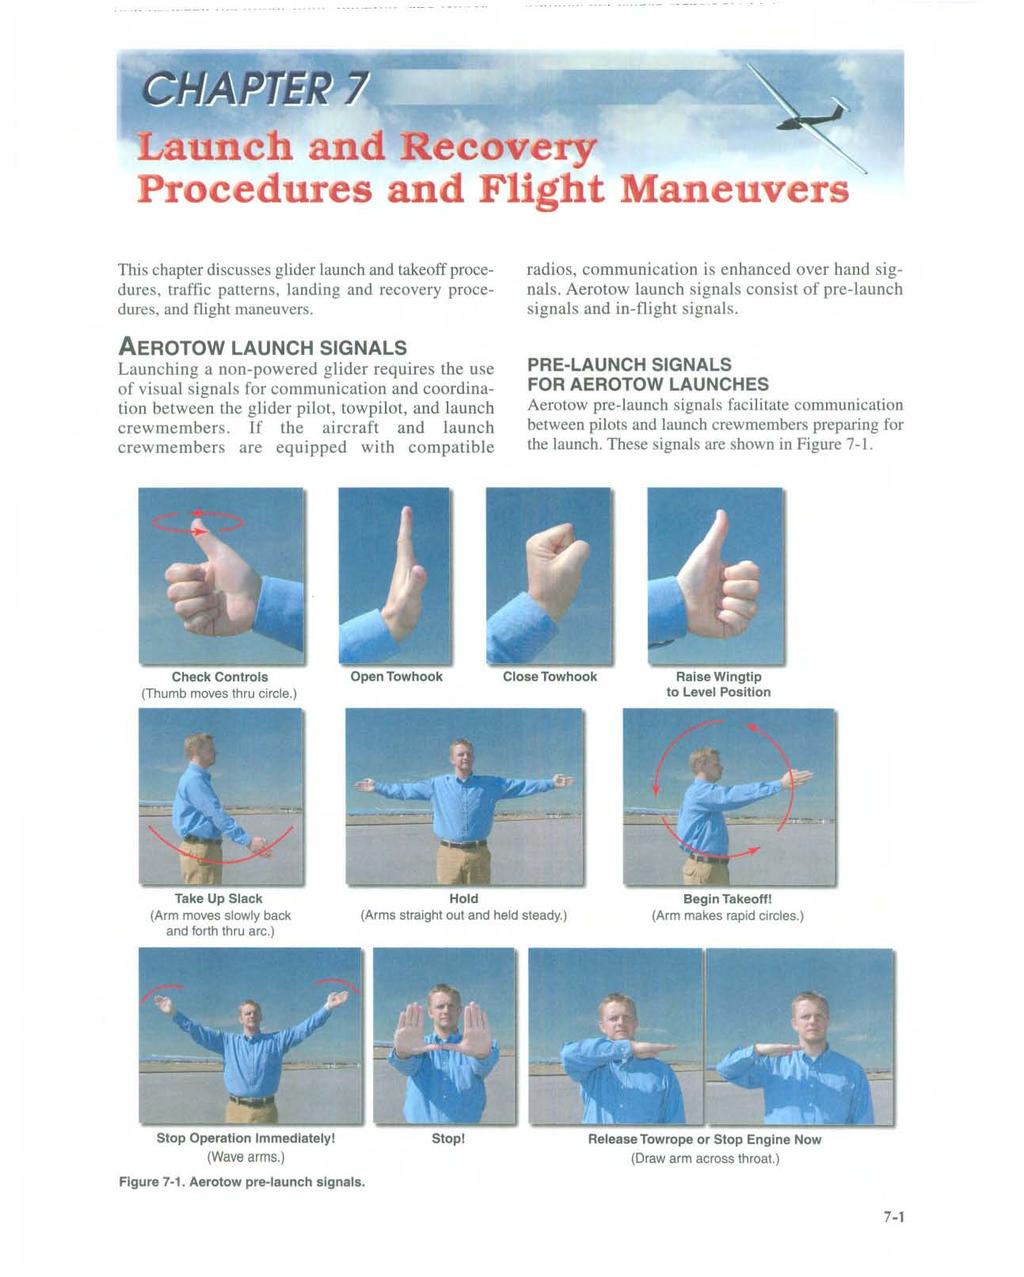 CJJfJA'J!Jf. 7J Launch and Recovery Procedures and Flight Maneuvers This chapter discusses glider launch and takeoff procedures, traffic patterns, landing and recovery procedures, and flight maneuvers.